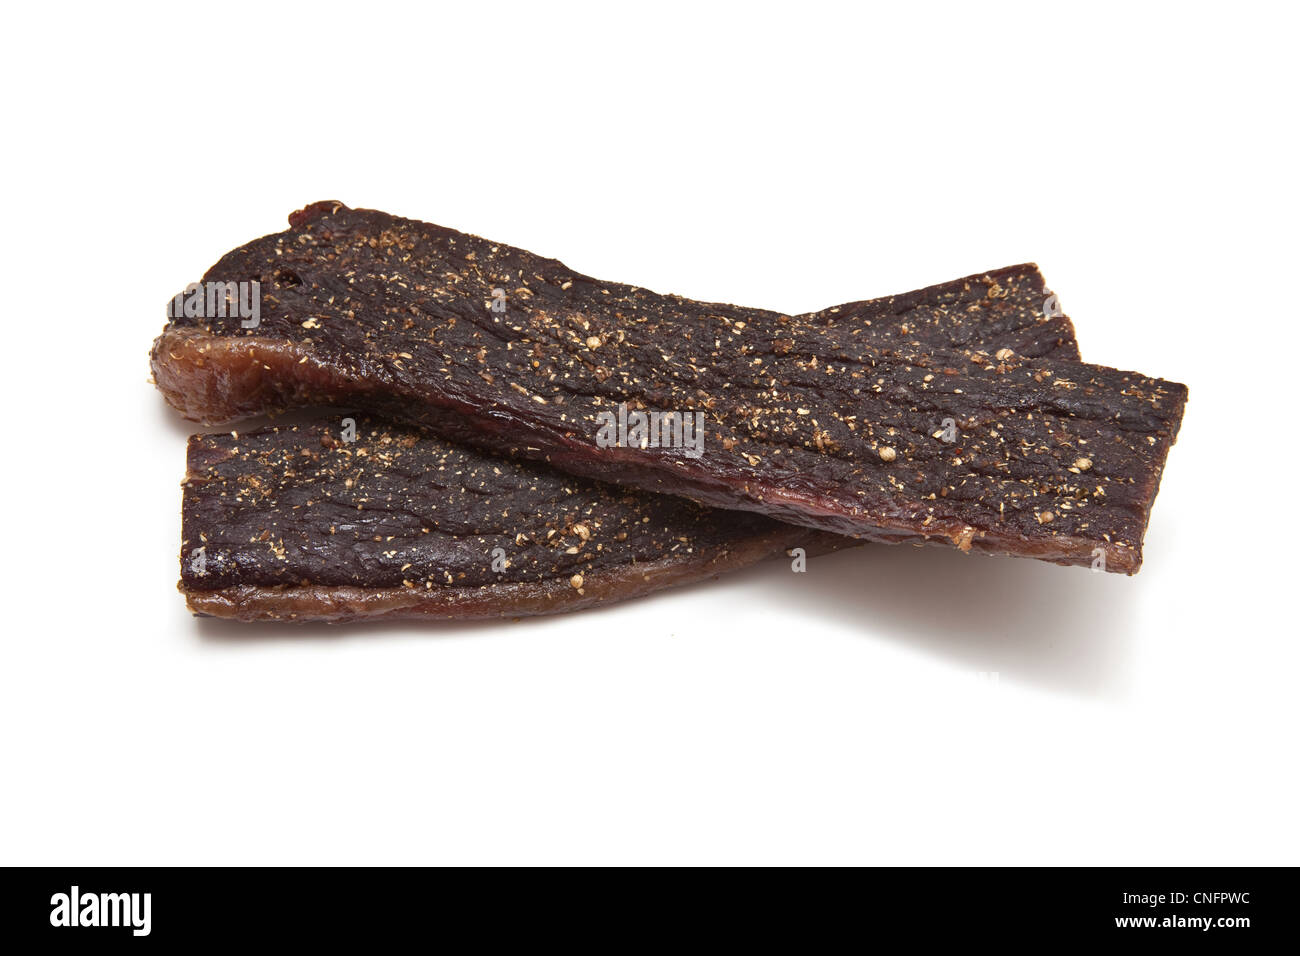 South African biltong (beef jerky) isolated on a white background Stock Photo